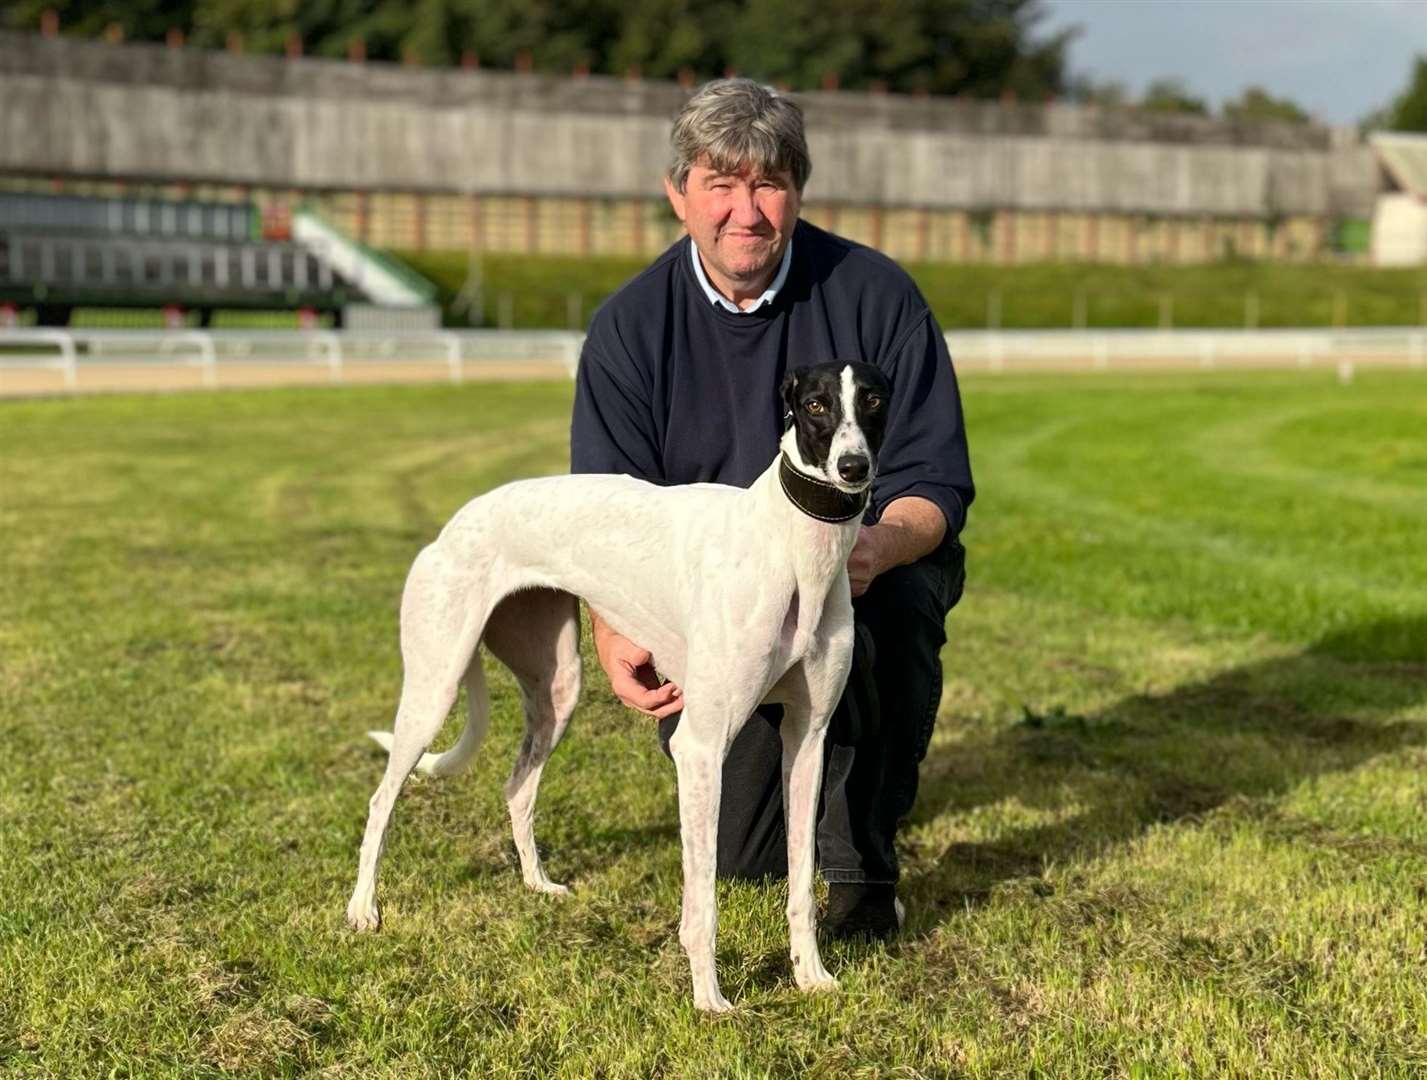 Harvel-based greyhound trainer Tony Collett last won the Cesarewitch in 2008. Picture: Fortitude Communications